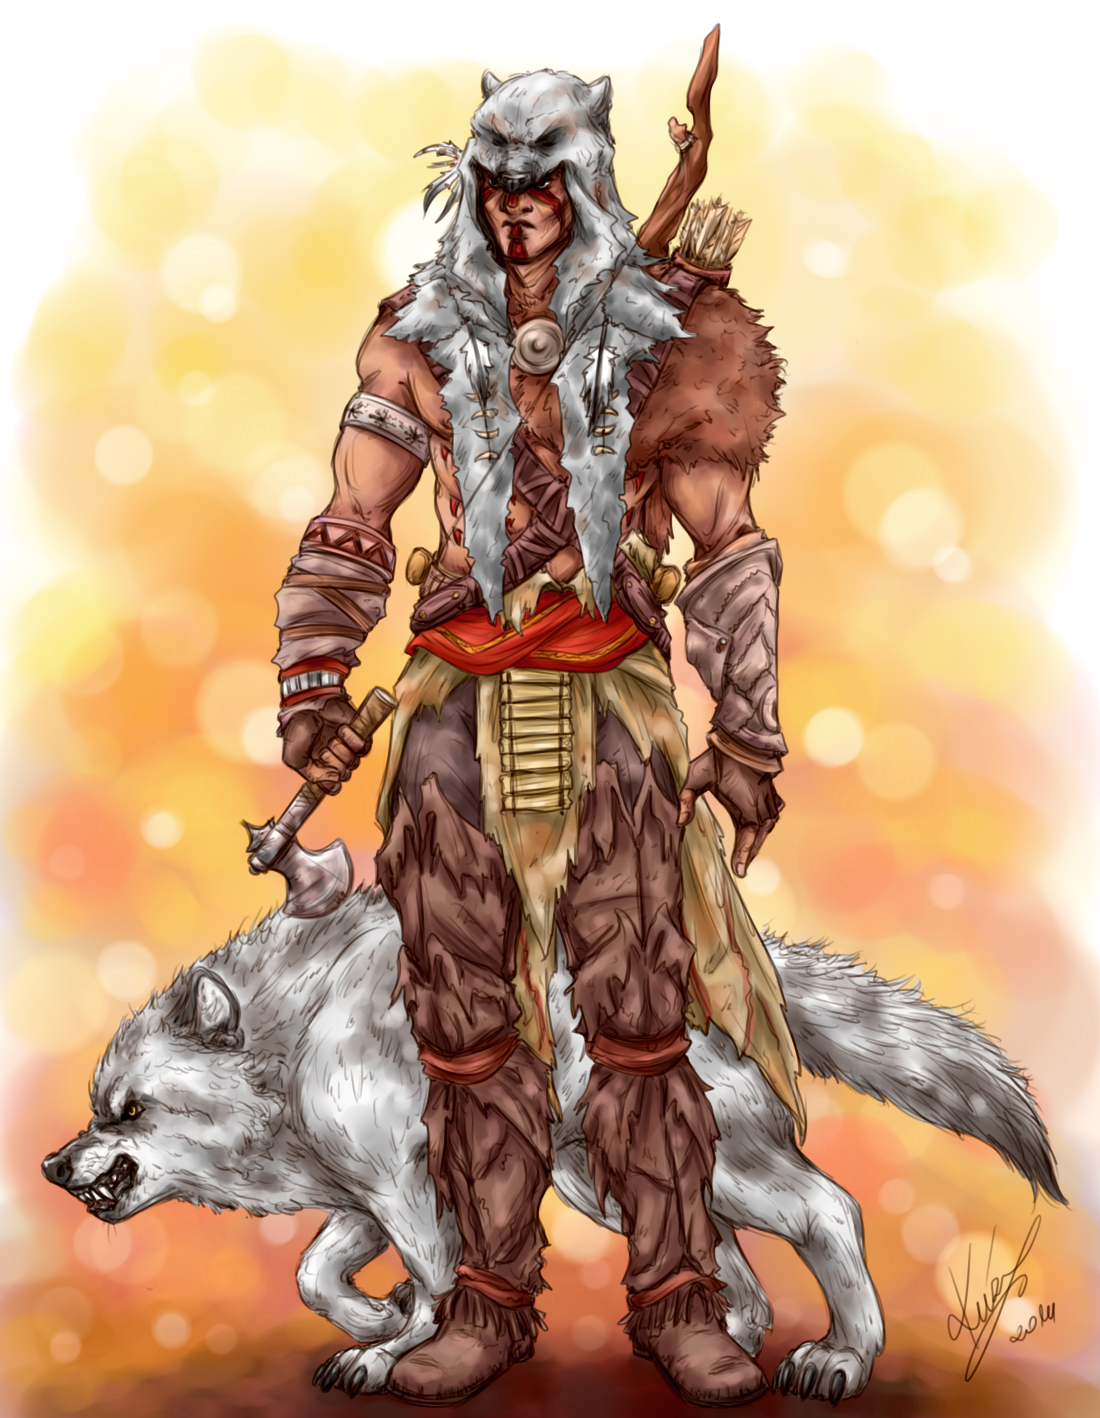 Assassin's Creed III - Ratonhnhake:ton by cindy-drawings on DeviantArt